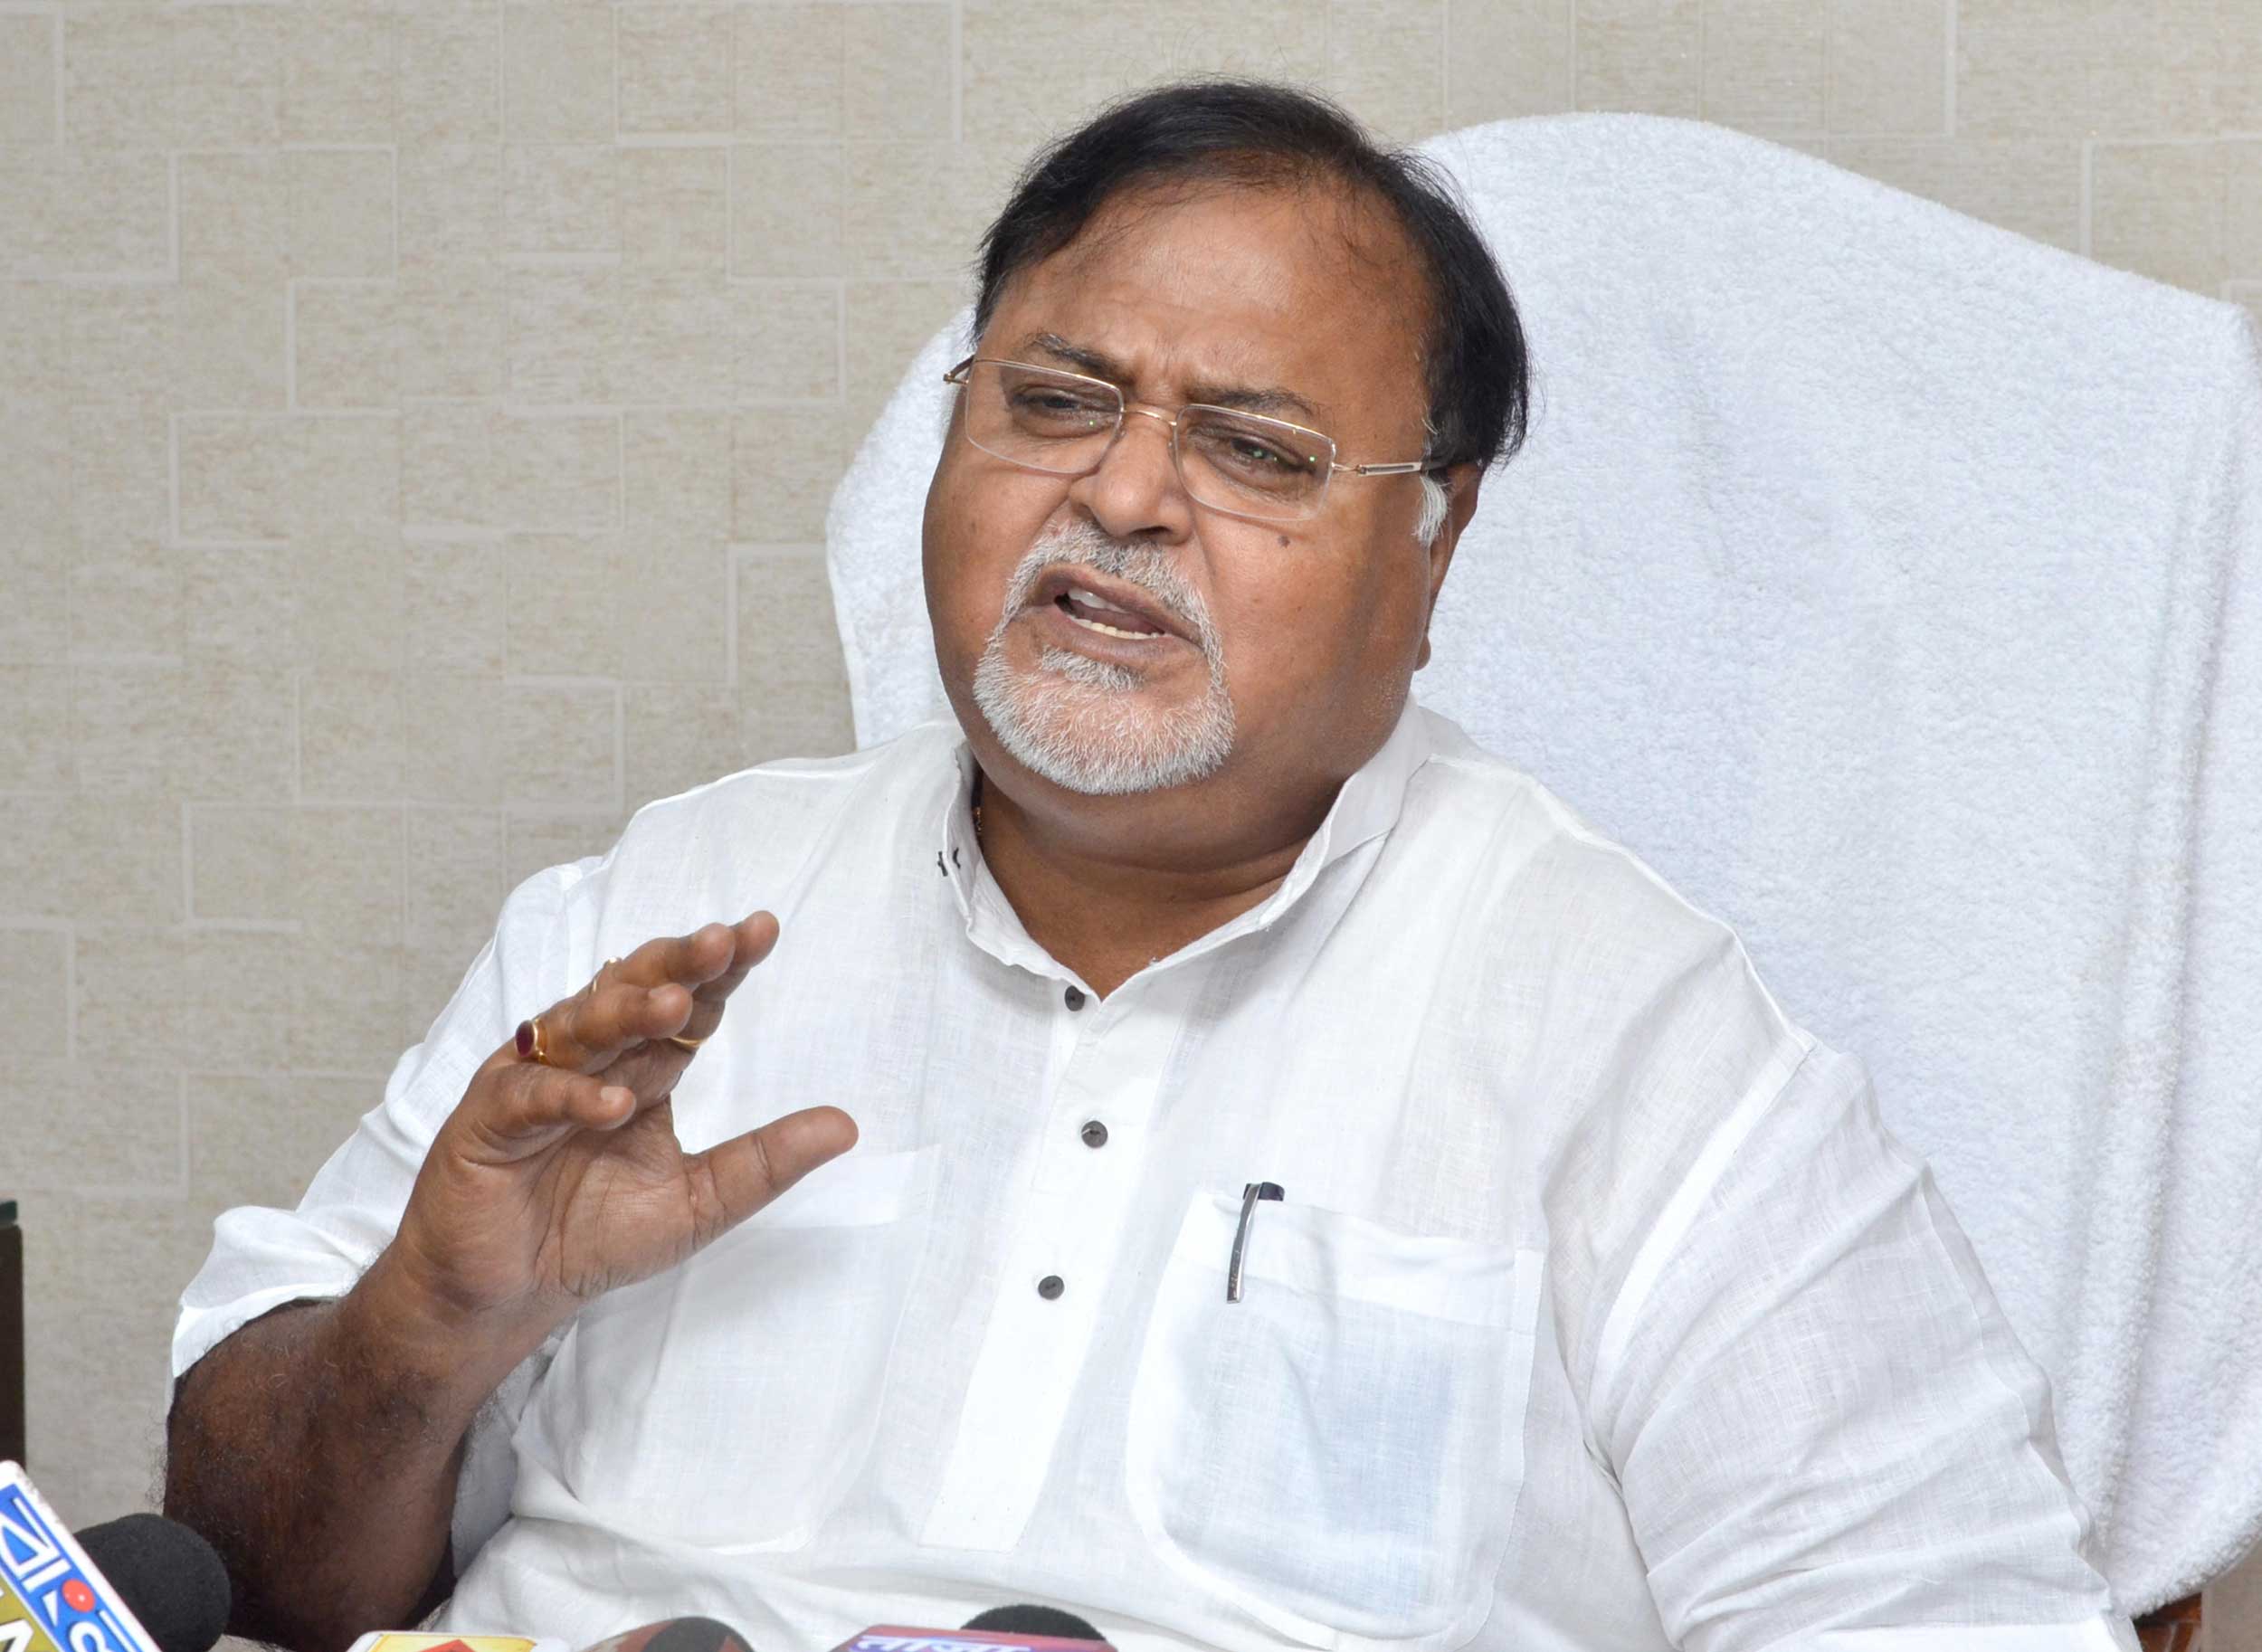 “We need to simply this process. We will soon place the proposal in the state cabinet for discussion. The new system will be implemented once the cabinet gives its approval,” Partha Chatterjee said.